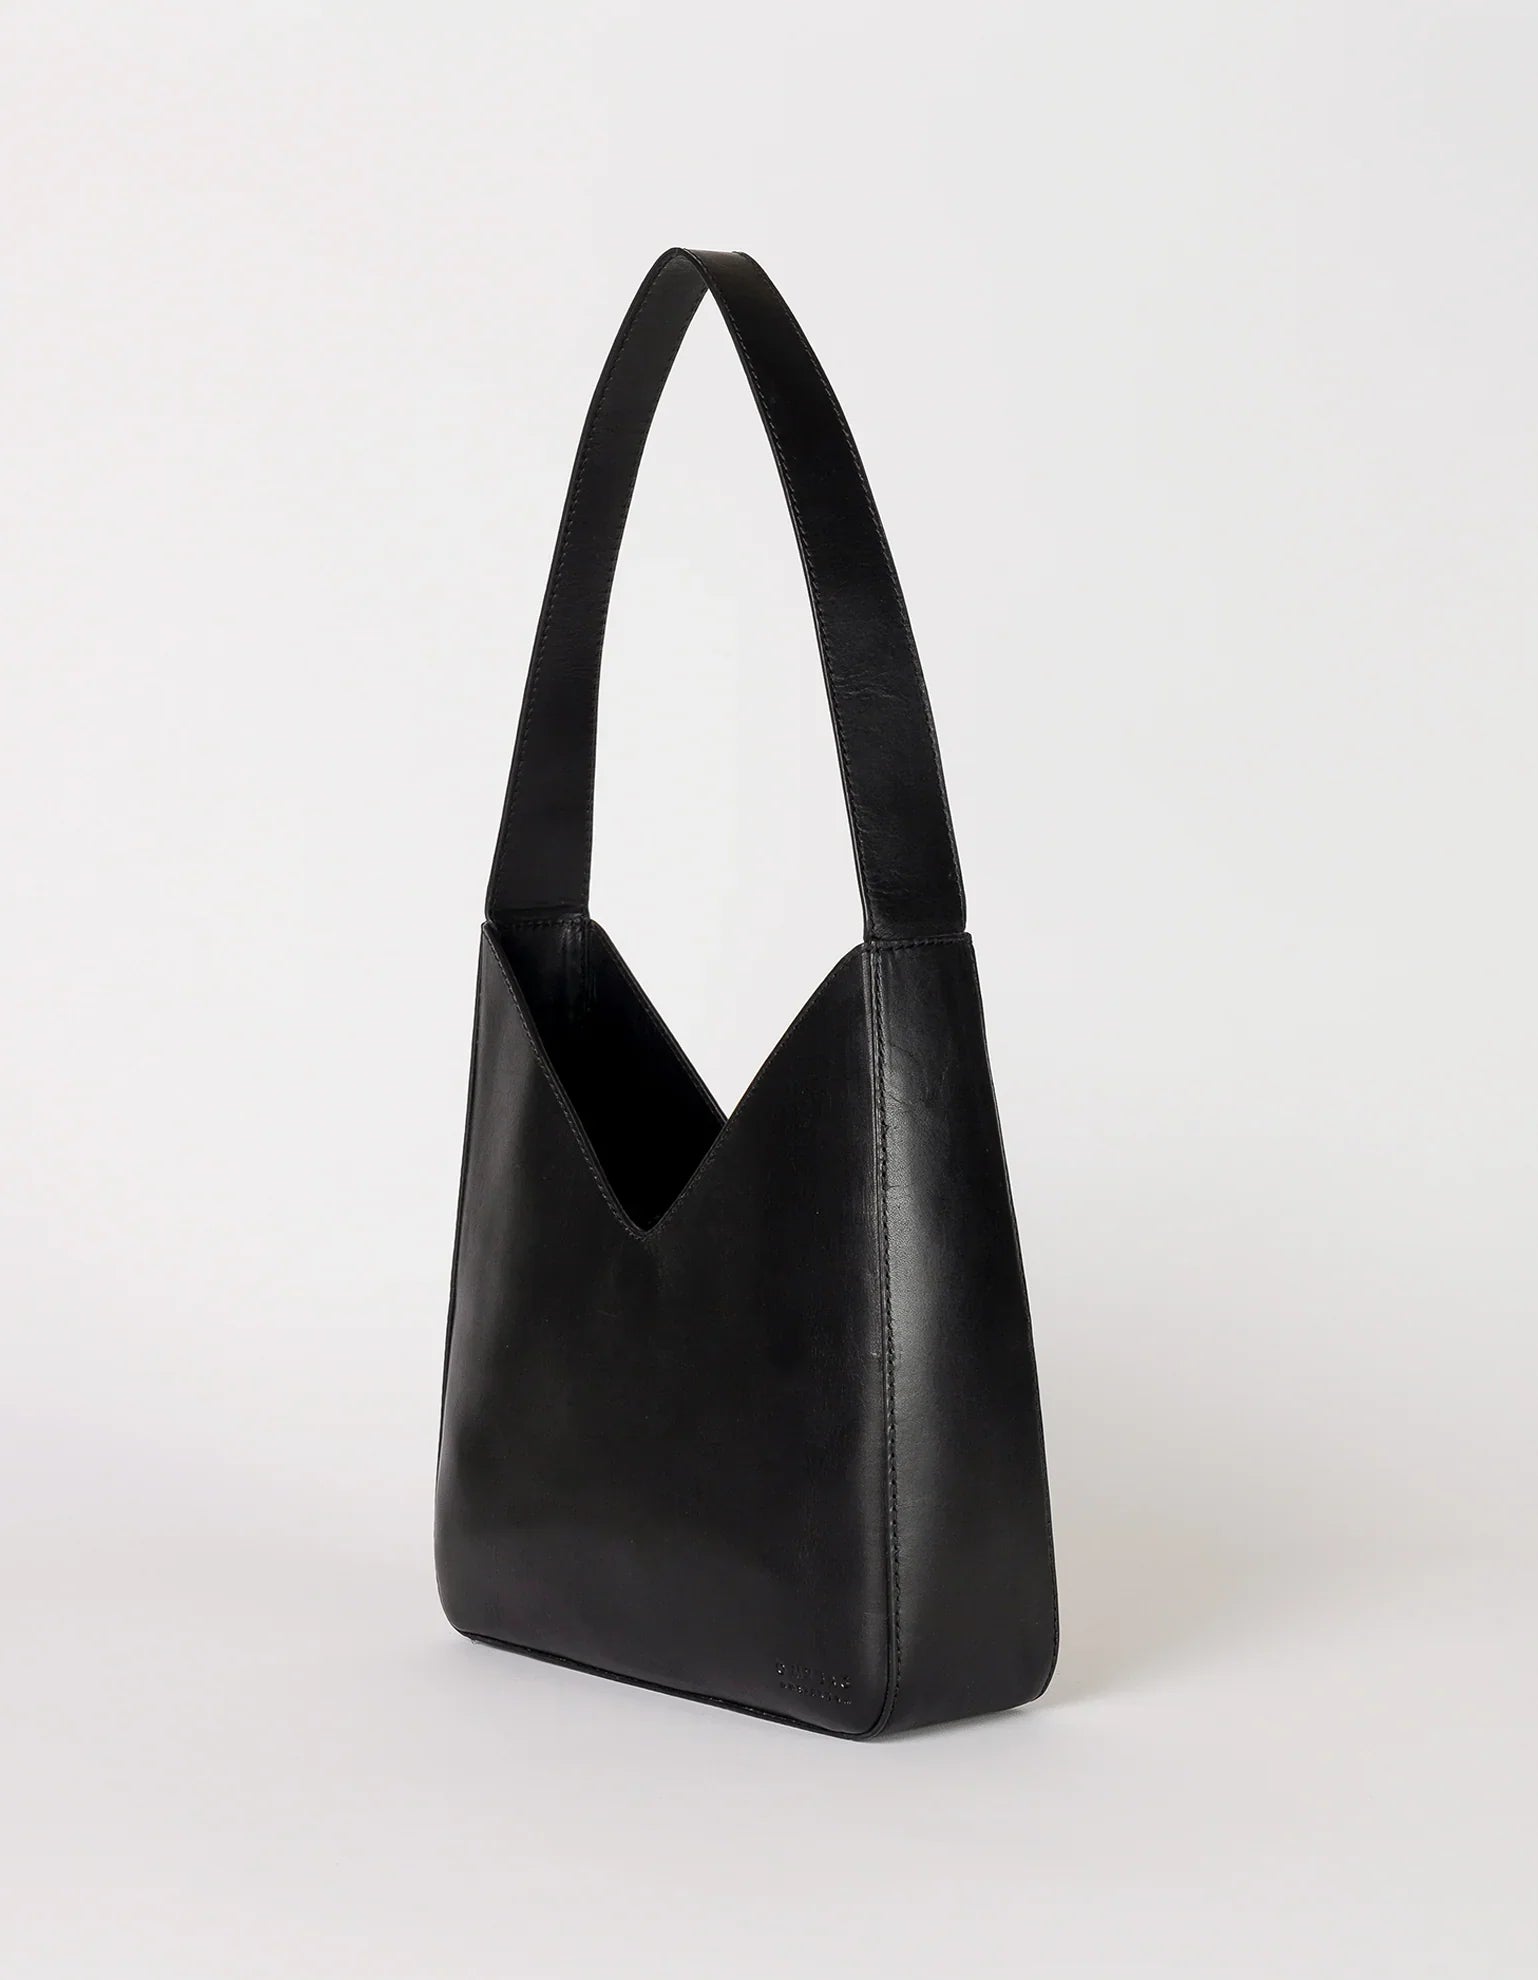 VICKY BAG - BLACK CLASSIC LEATHER